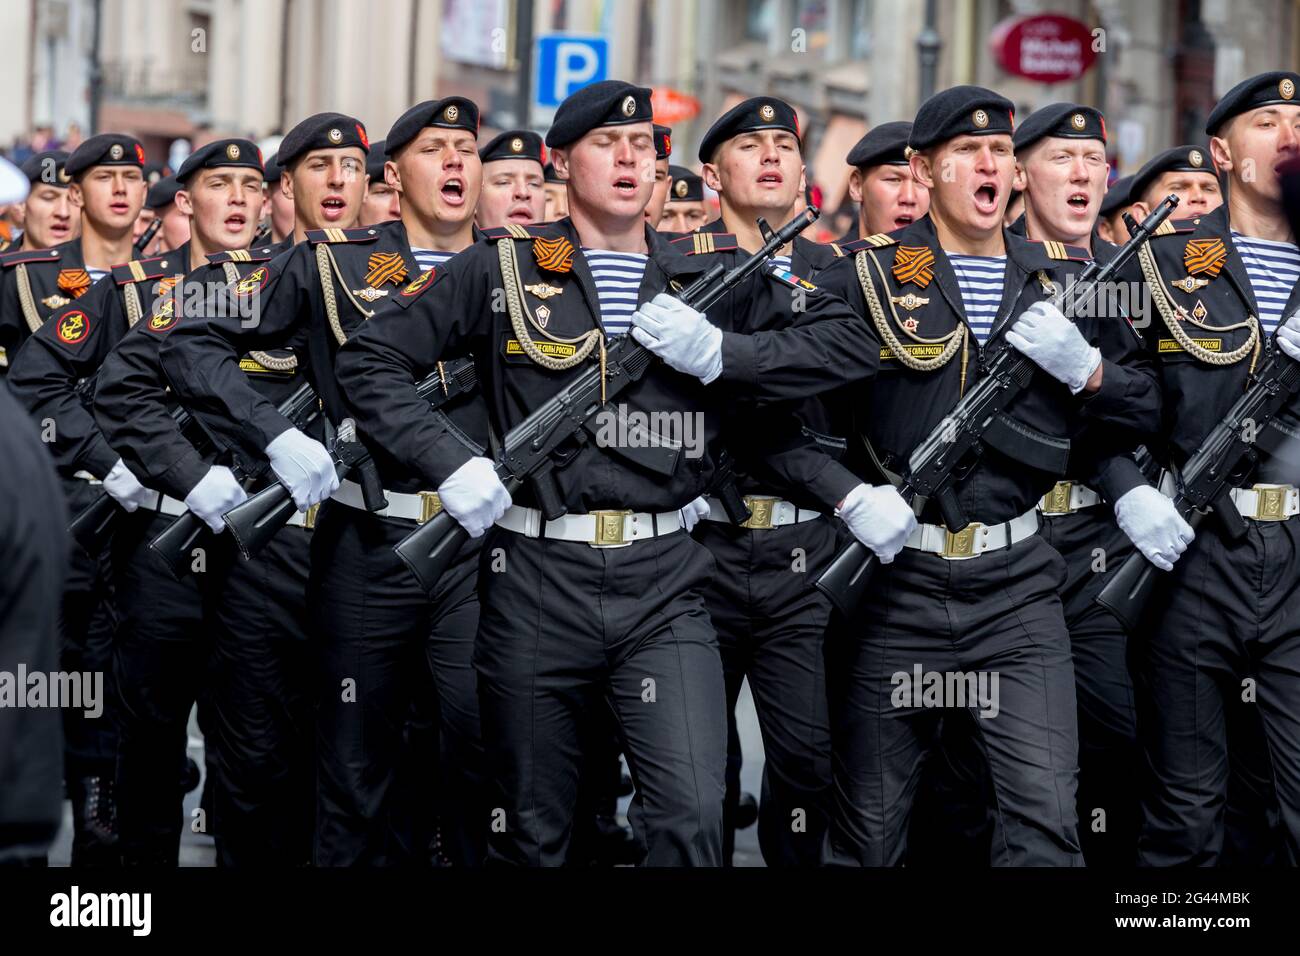 Russia, Vladivostok, 05/09/2018. Armed marines in dress uniform with machine guns on parade on annual Victory Day on May 9. Holi Stock Photo